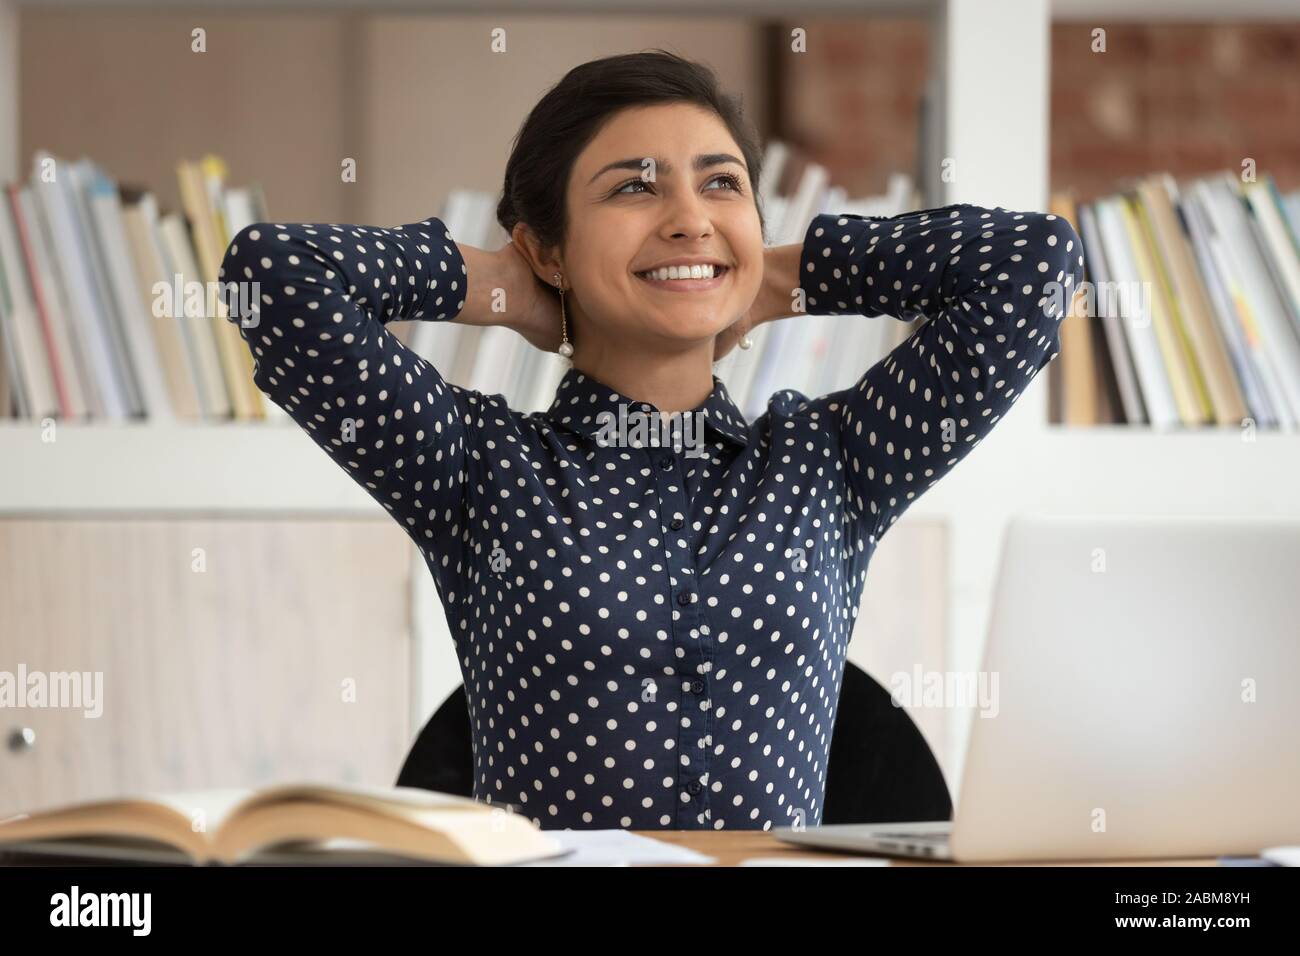 Happy indian girl relaxing after finishing school project. Stock Photo